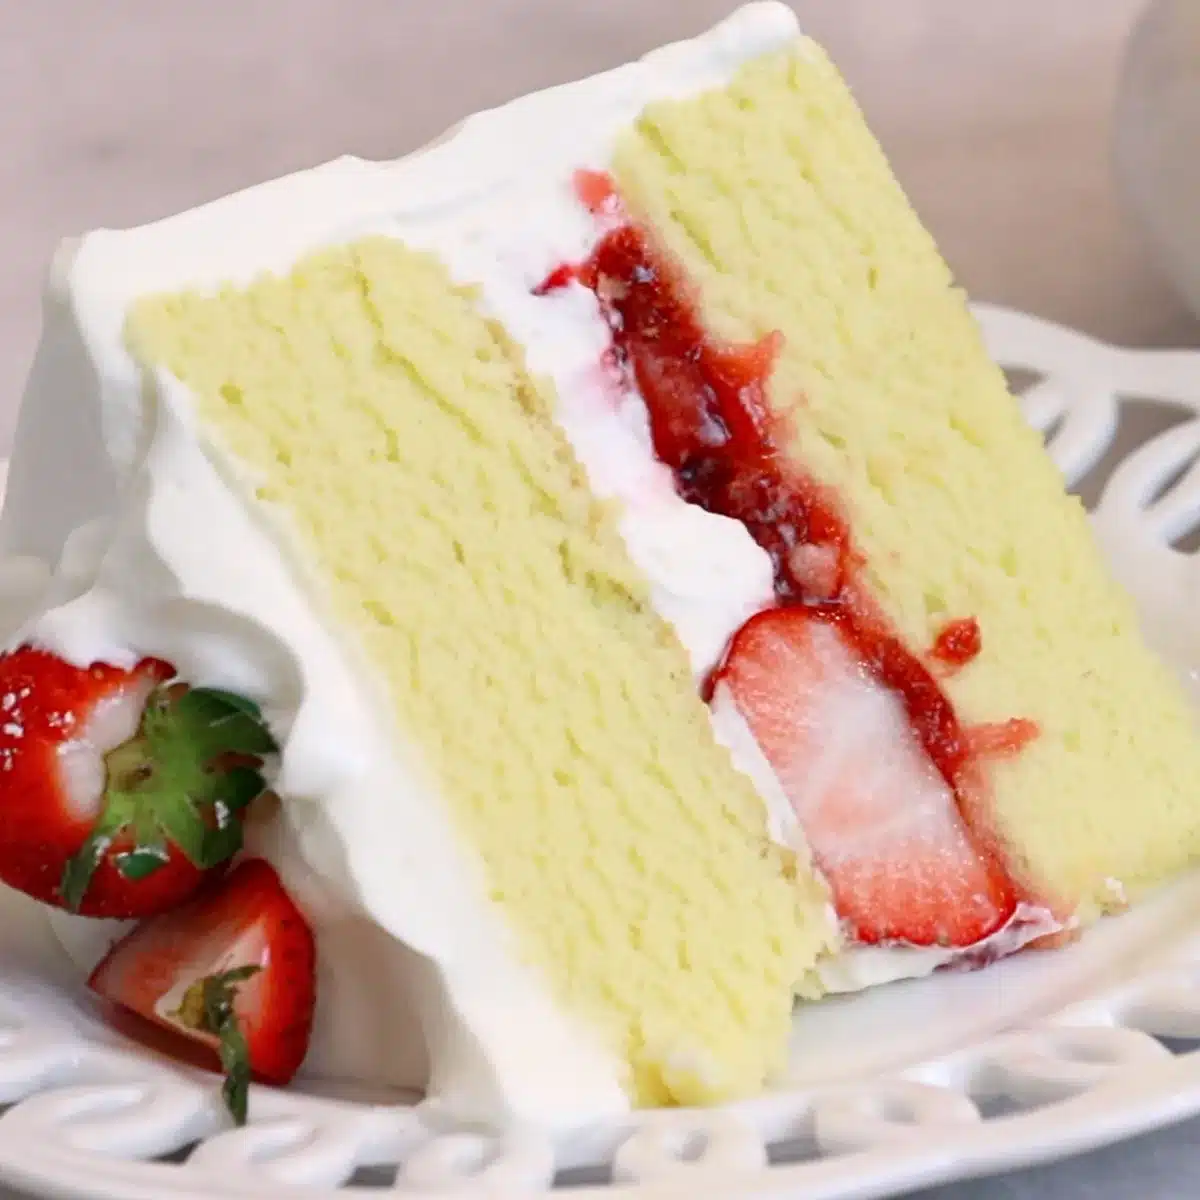 a slice of strawberry cream cake on a white plate